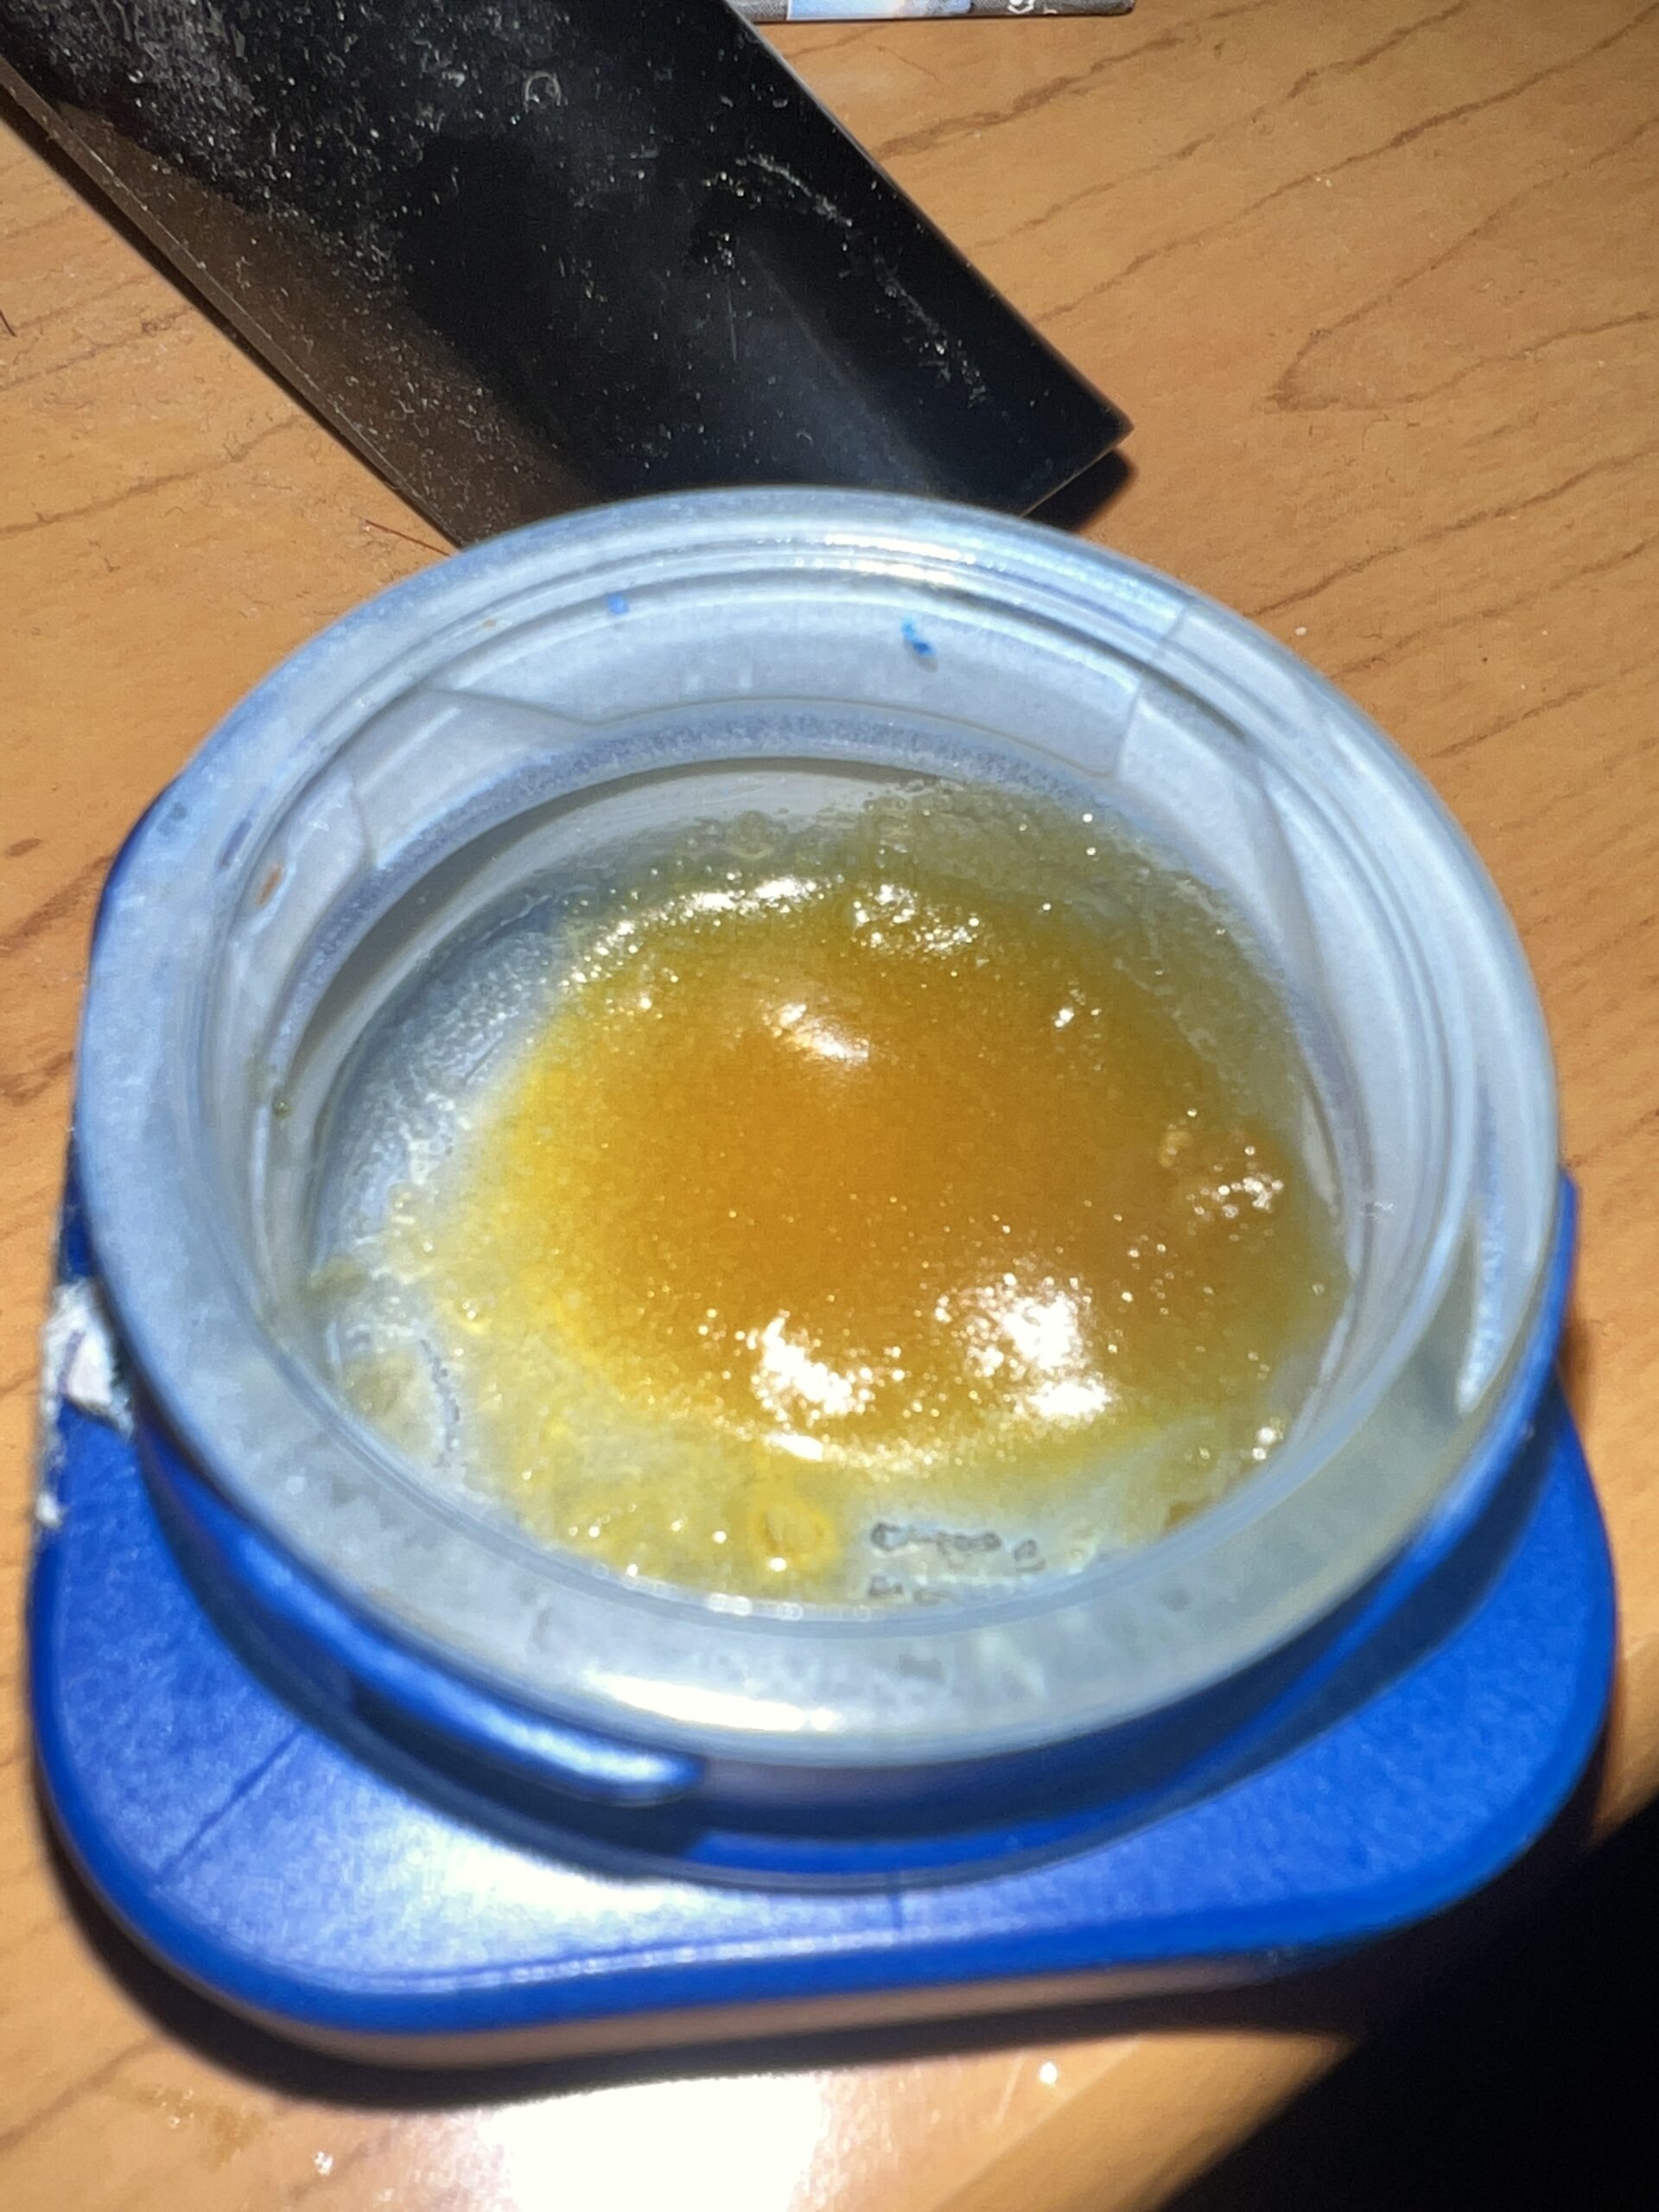 Pound Cake Live Resin Badder - Local British Columbia Concentrate, Vancouver Flower Concentrates